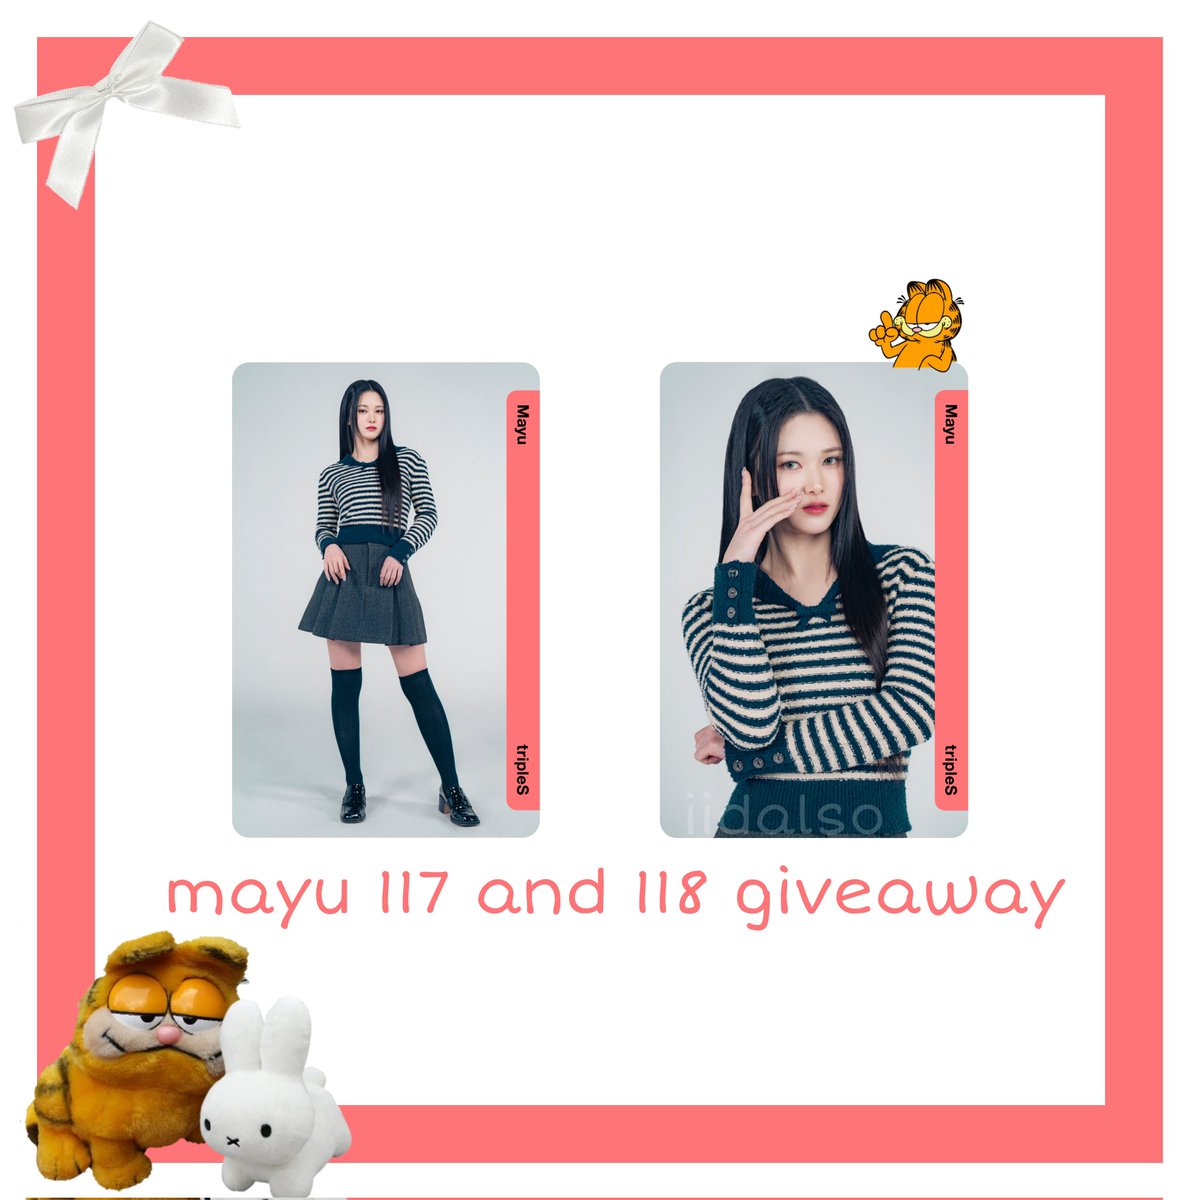 objekt giveaway! <3 🐇

mayu 117 and 118 

— like & rt 
— comment with id 
— 1 winner
【 you do not need to follow just like, comment & rt! 】
ends on the 4th of this month !

— #tripleS #트리플에스 ♡